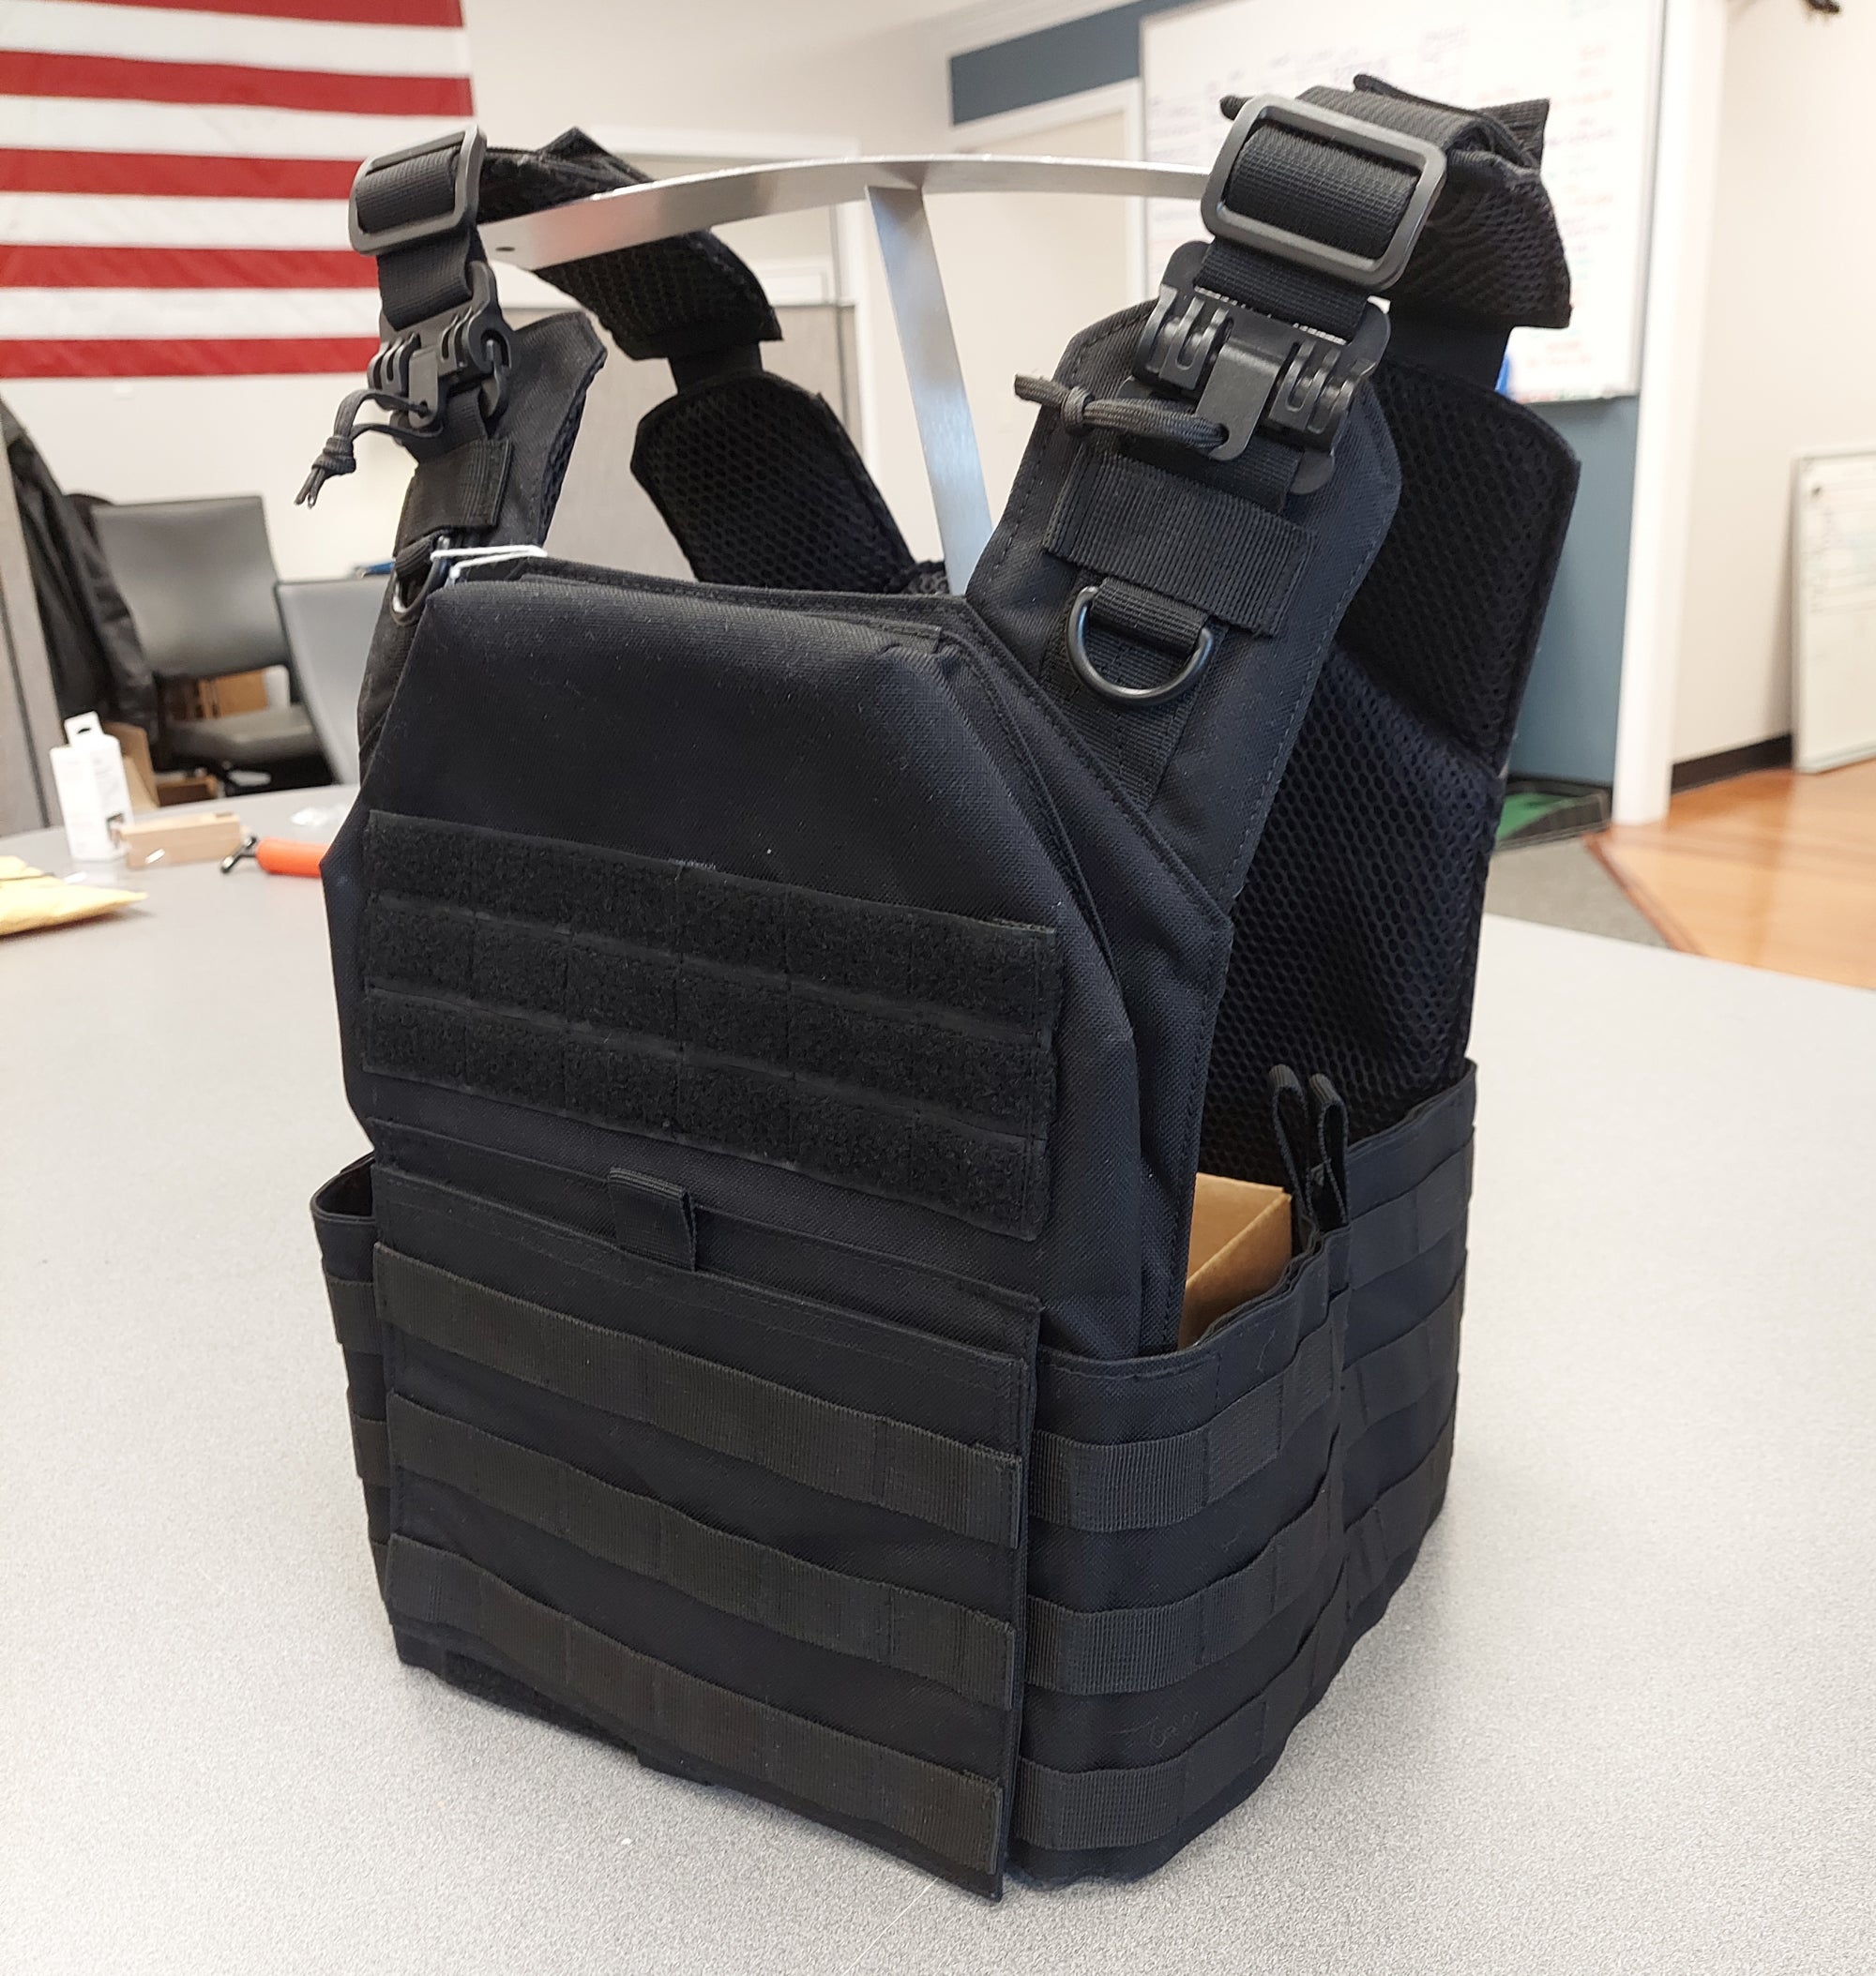 The Optimal Armor Carrier for Urban Military Use